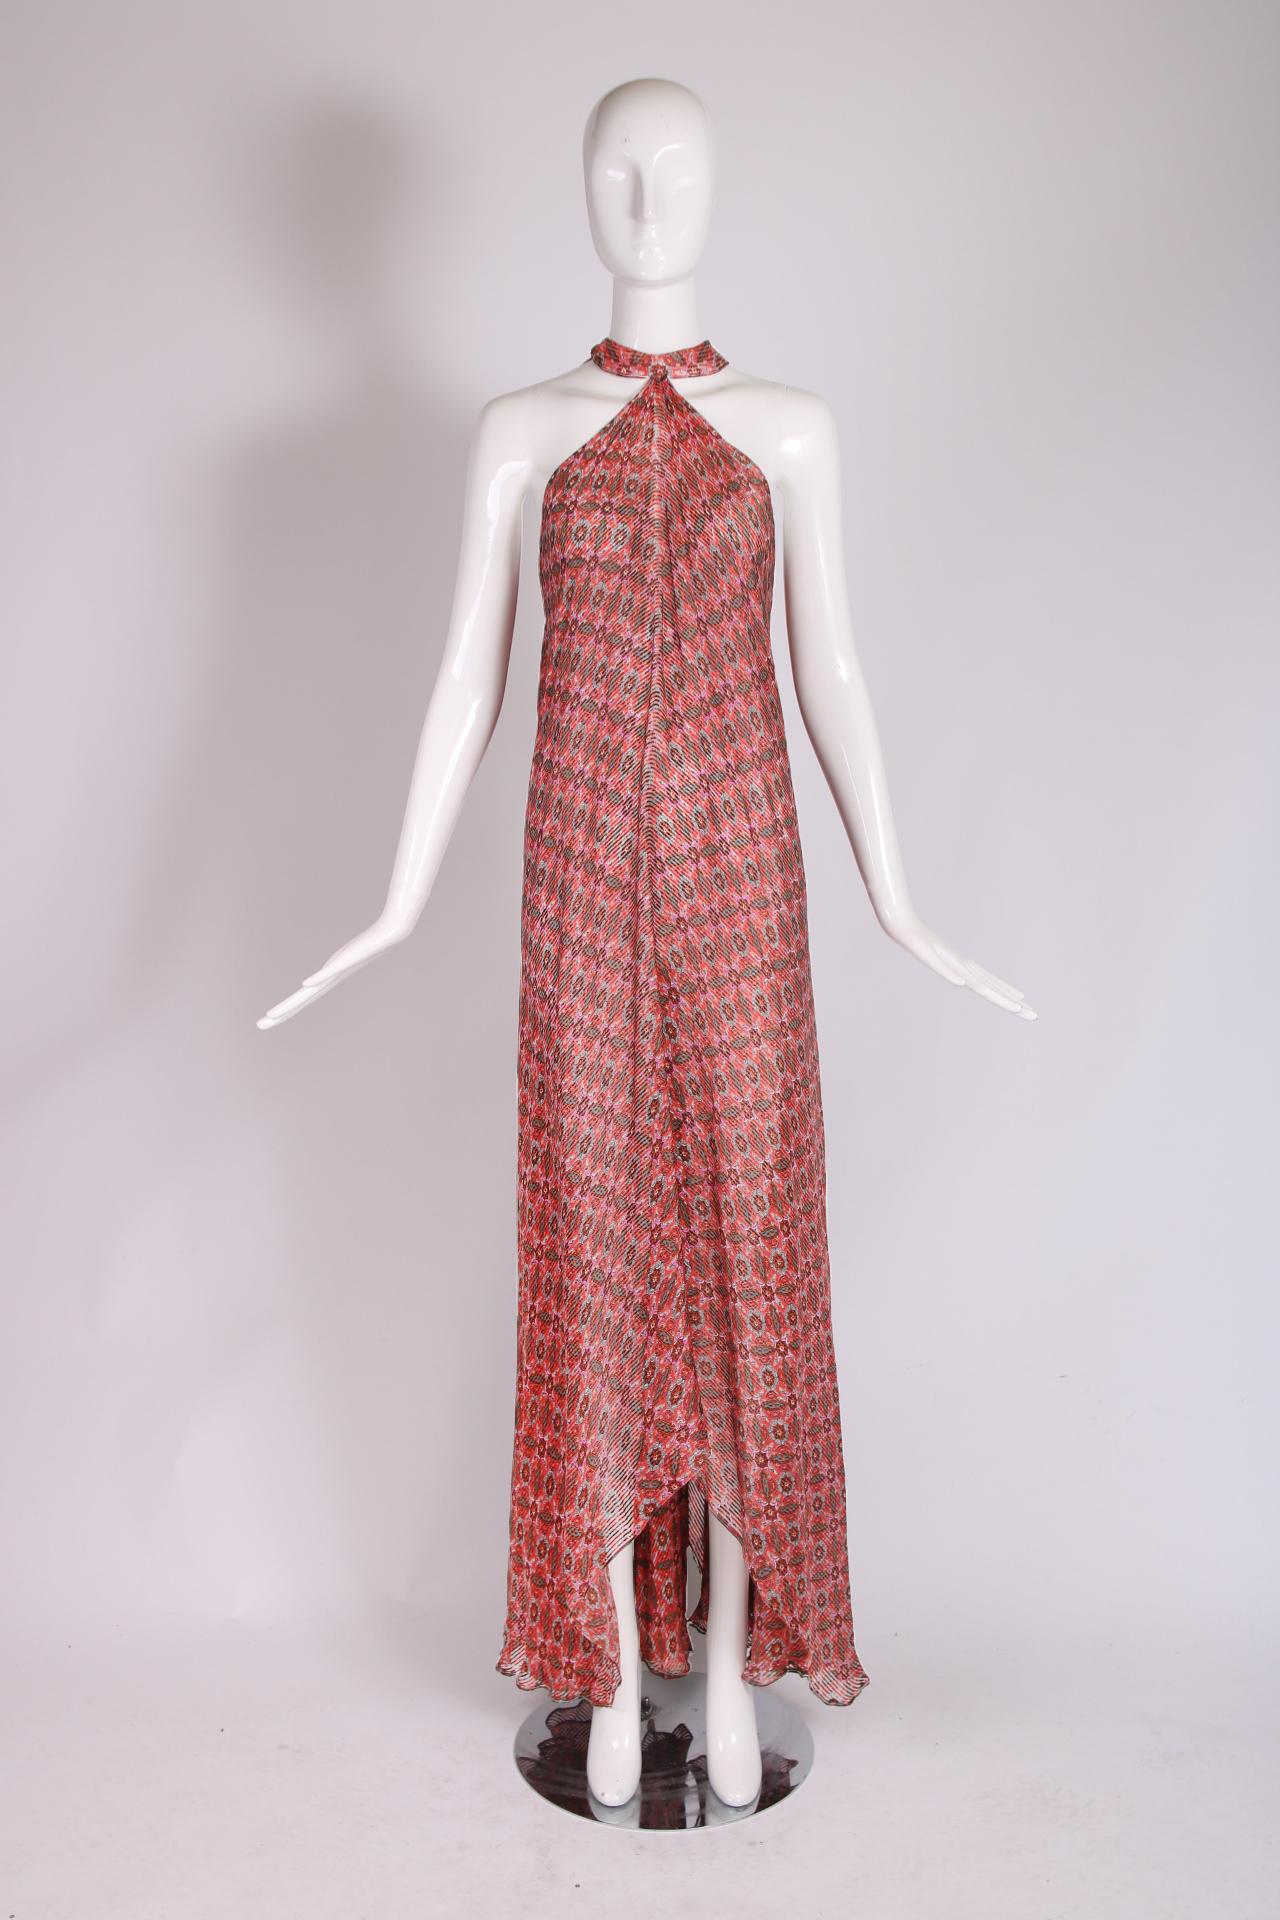 A Madame Gres boutique printed chiffon halter neck gown with an unusual draped design at the back. The hemline is higher at each side and longer in the front and back. Size tag 40. In excellent condition.

Bust: approx. 34